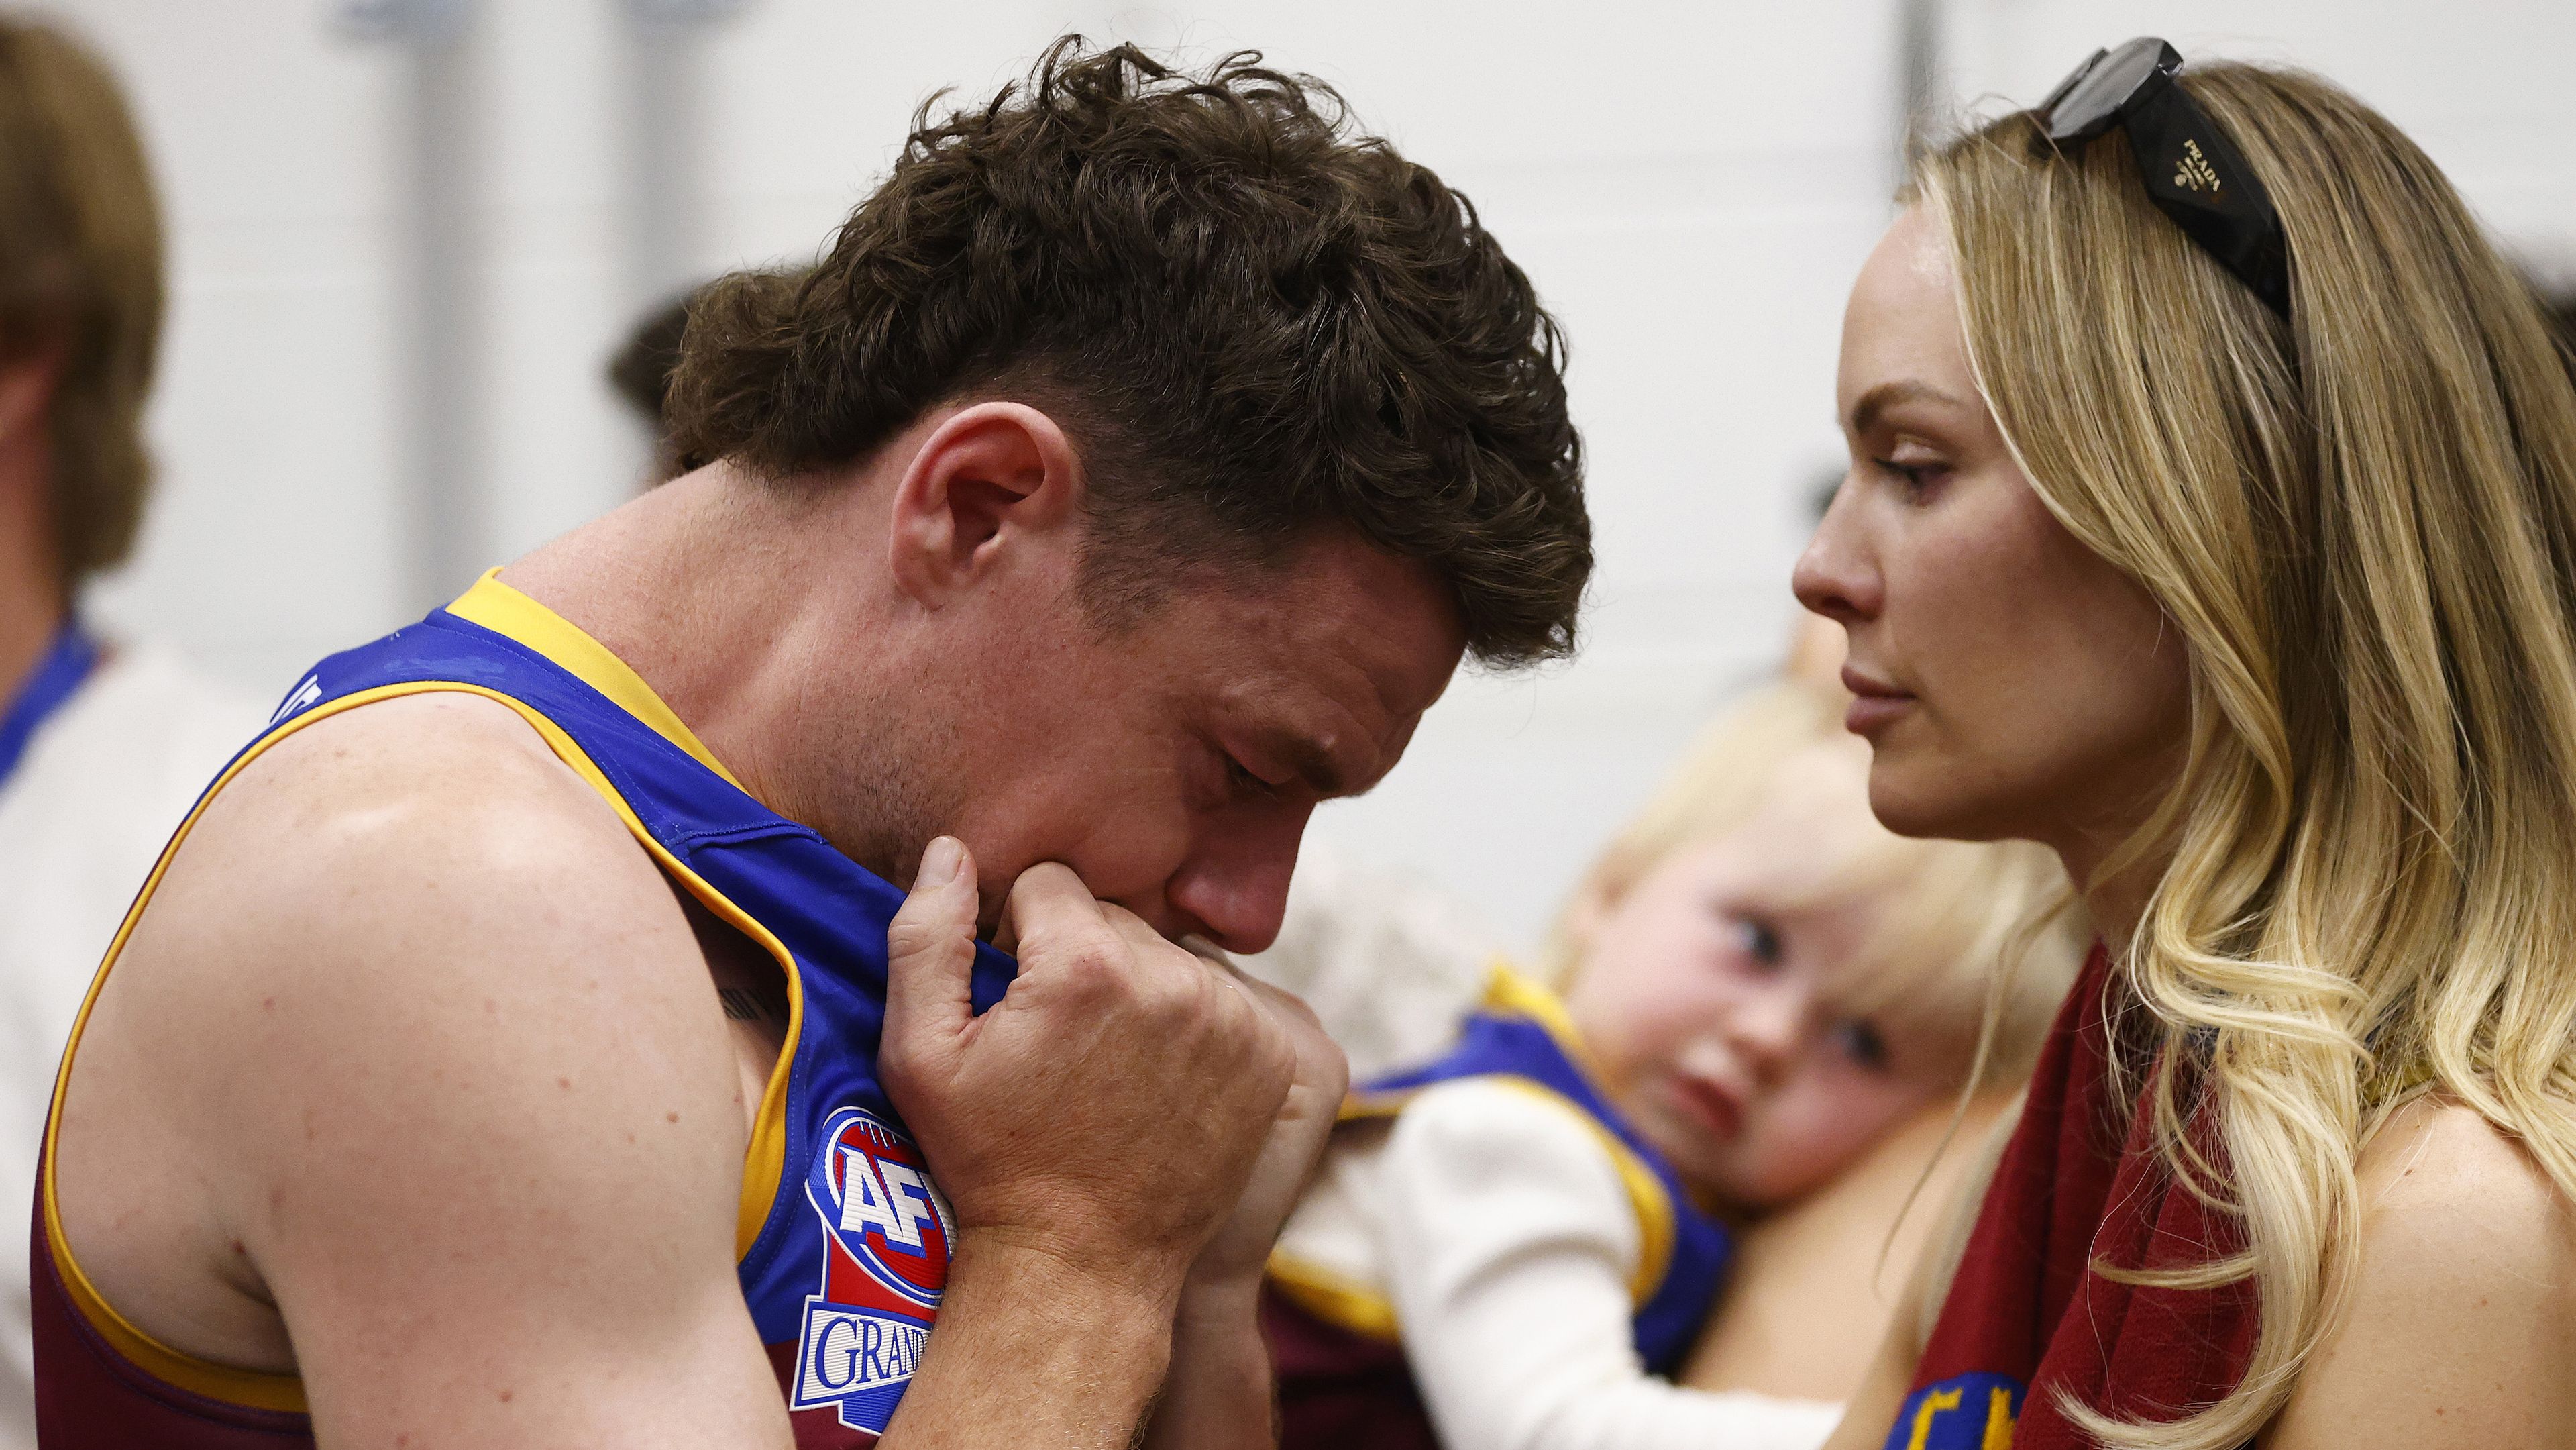 Lachie Neale is heartbroken in the rooms post match.